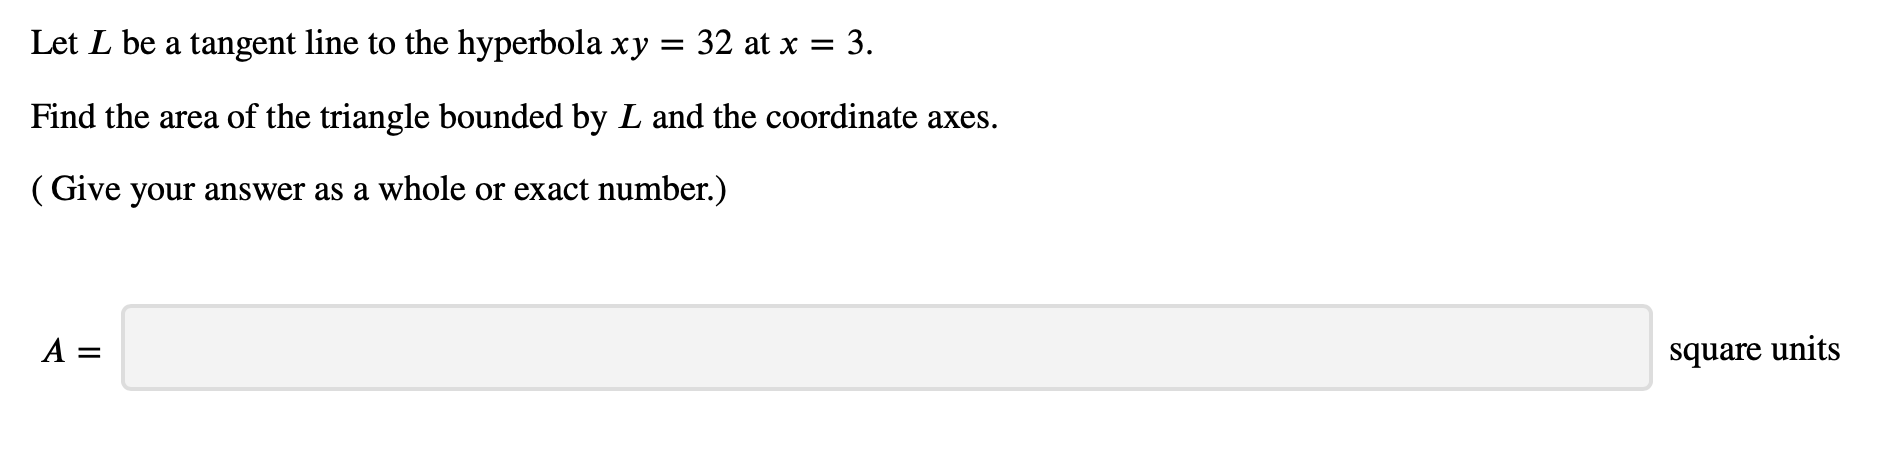 Let L be a tangent line to the hyperbola xy
32 at x3
Find the area of the triangle bounded by L and the coordinate axes.
(Give your answer as a whole or exact number.)
A =
square units
